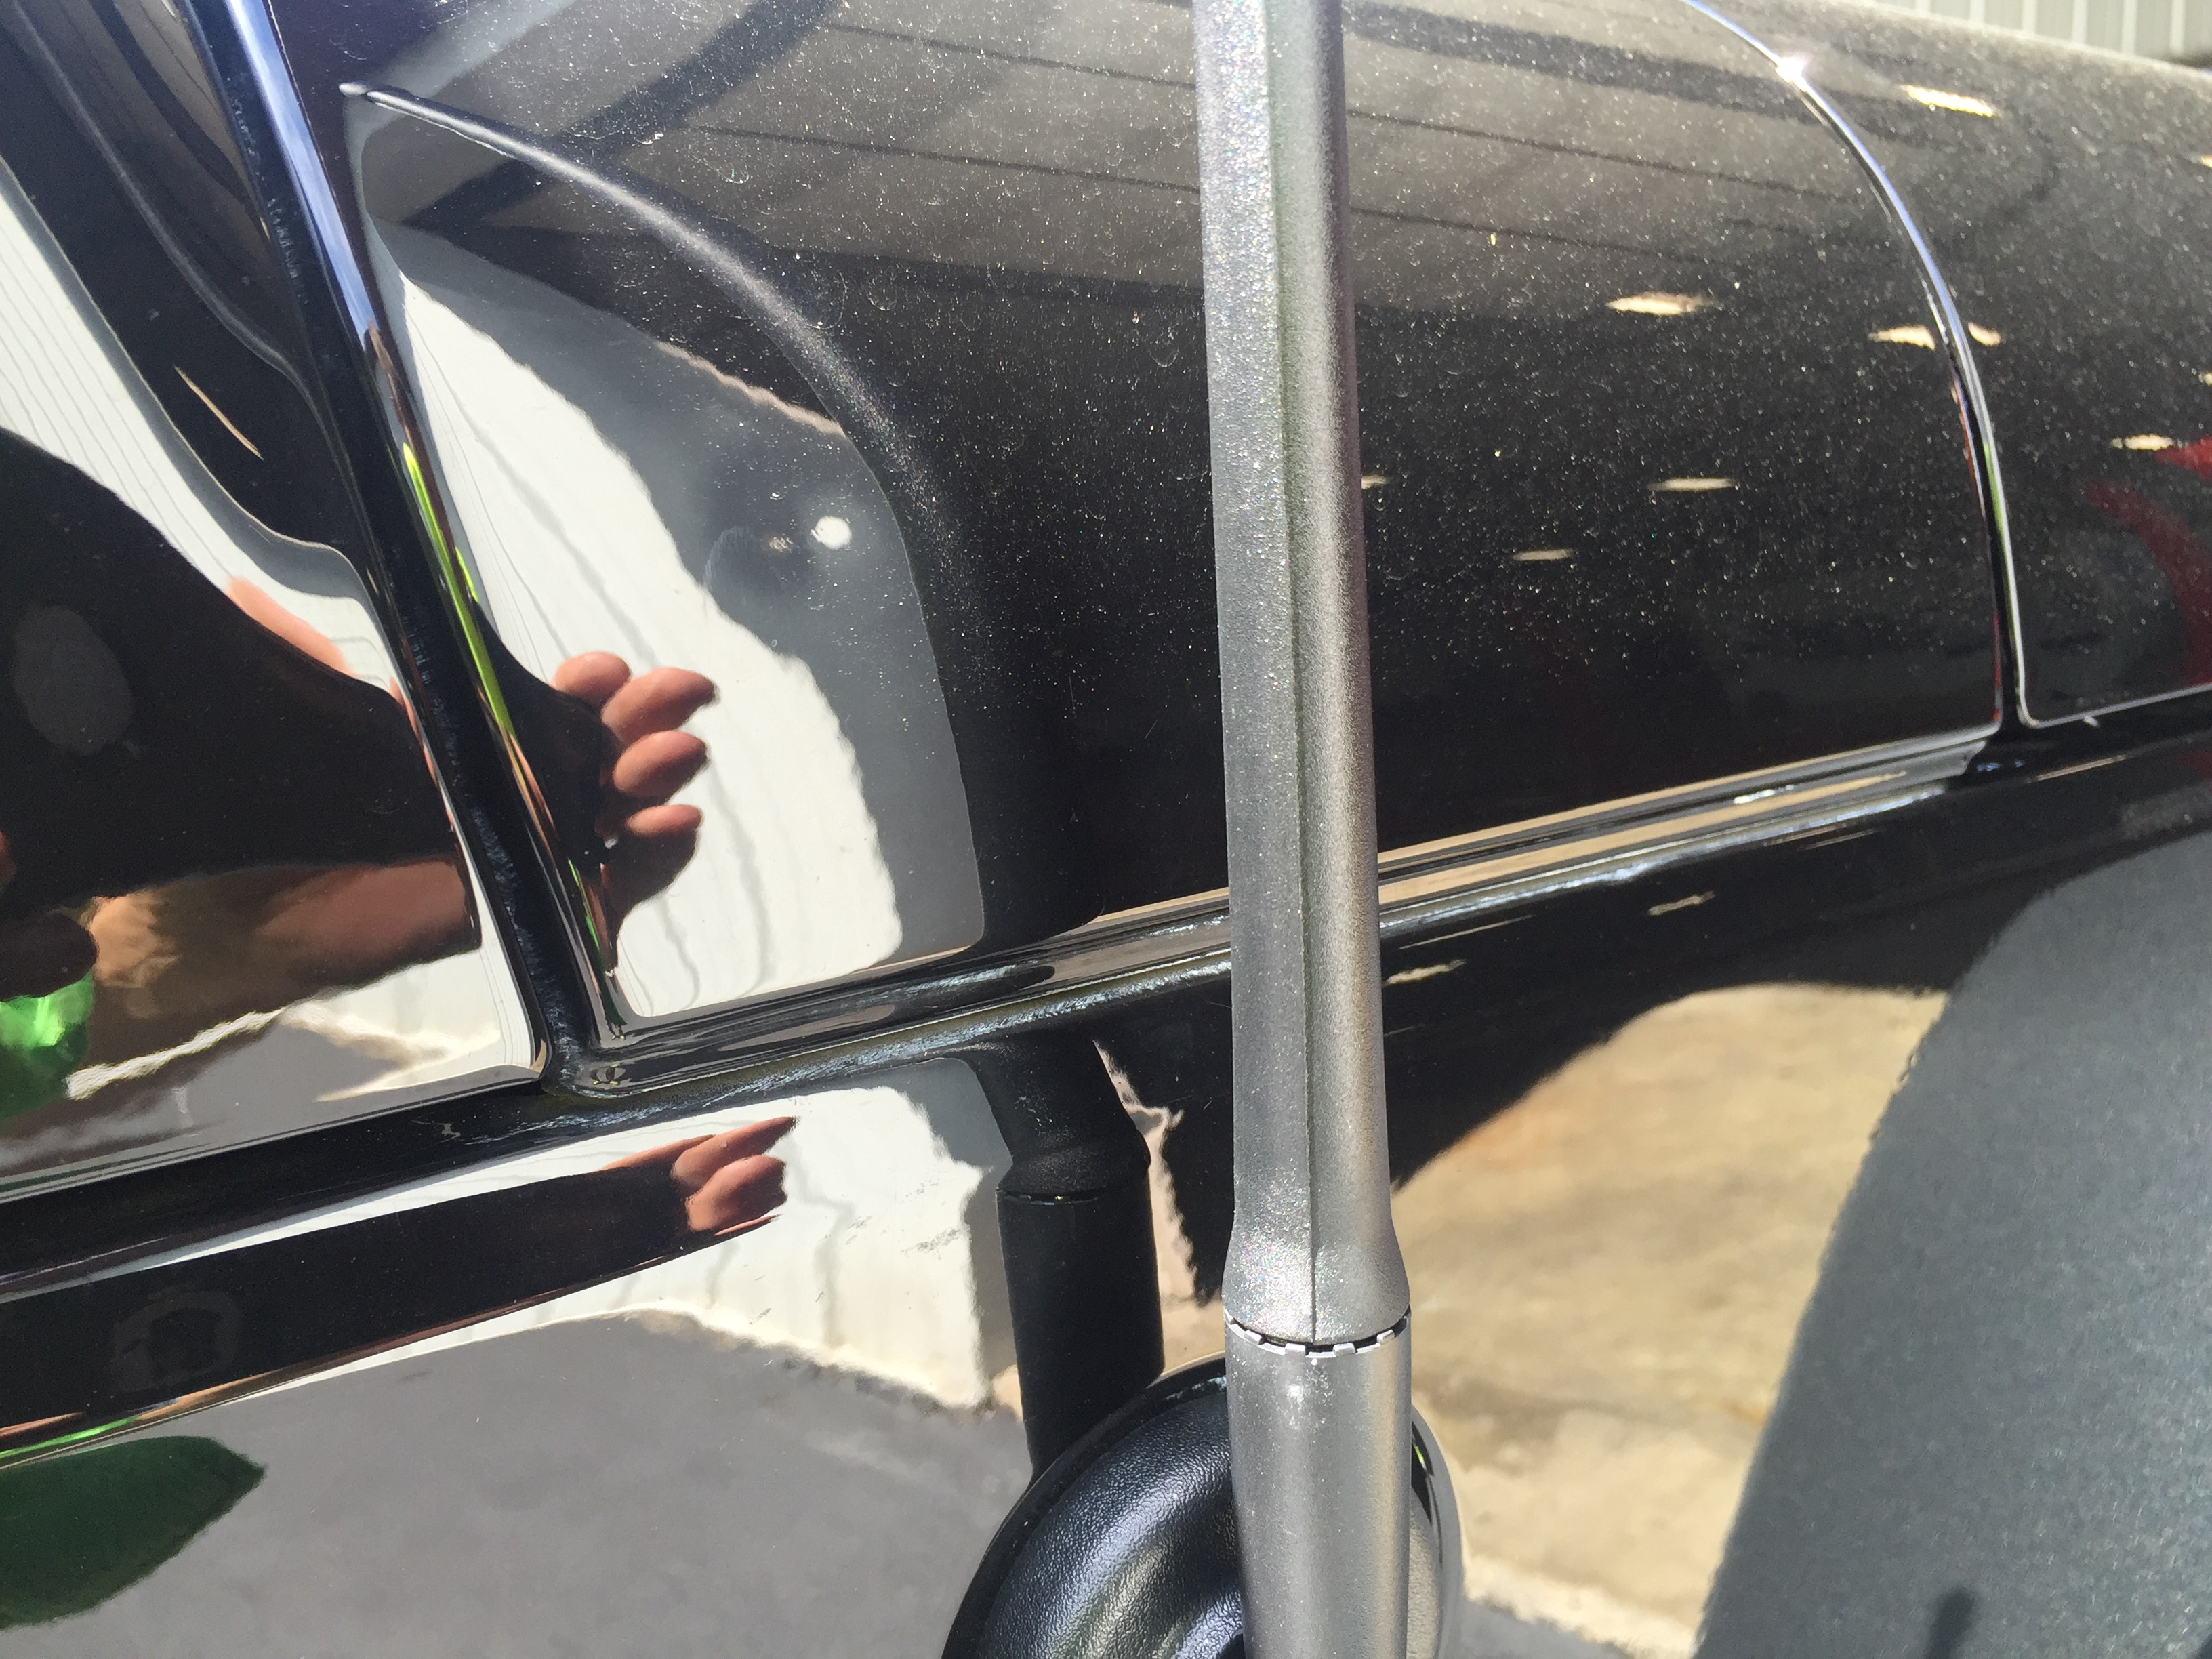 2015 Jeep Wrangler Cowl Dent, Paintless Dent Removal, Springfield, IL, http://217dent.com